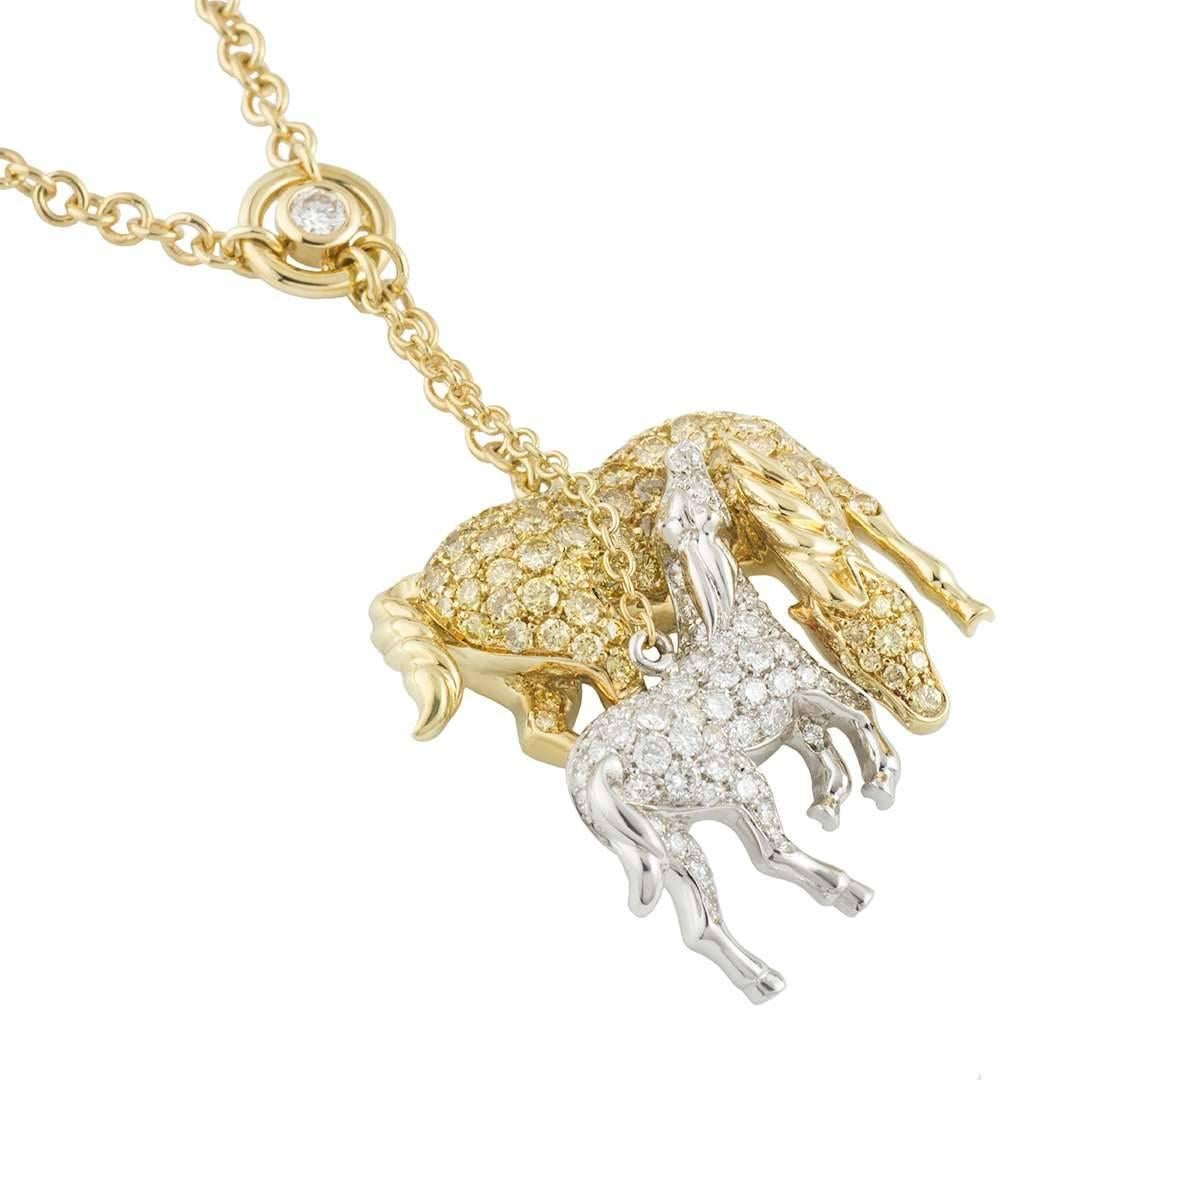 A unique large 18k yellow and white gold diamond Horse pendant. The pendant comprises of 2 Horse motifs set with round brilliant cut pave diamonds and 6 rubover set diamonds set throughout the chain. One Horse is 18k yellow gold set with round